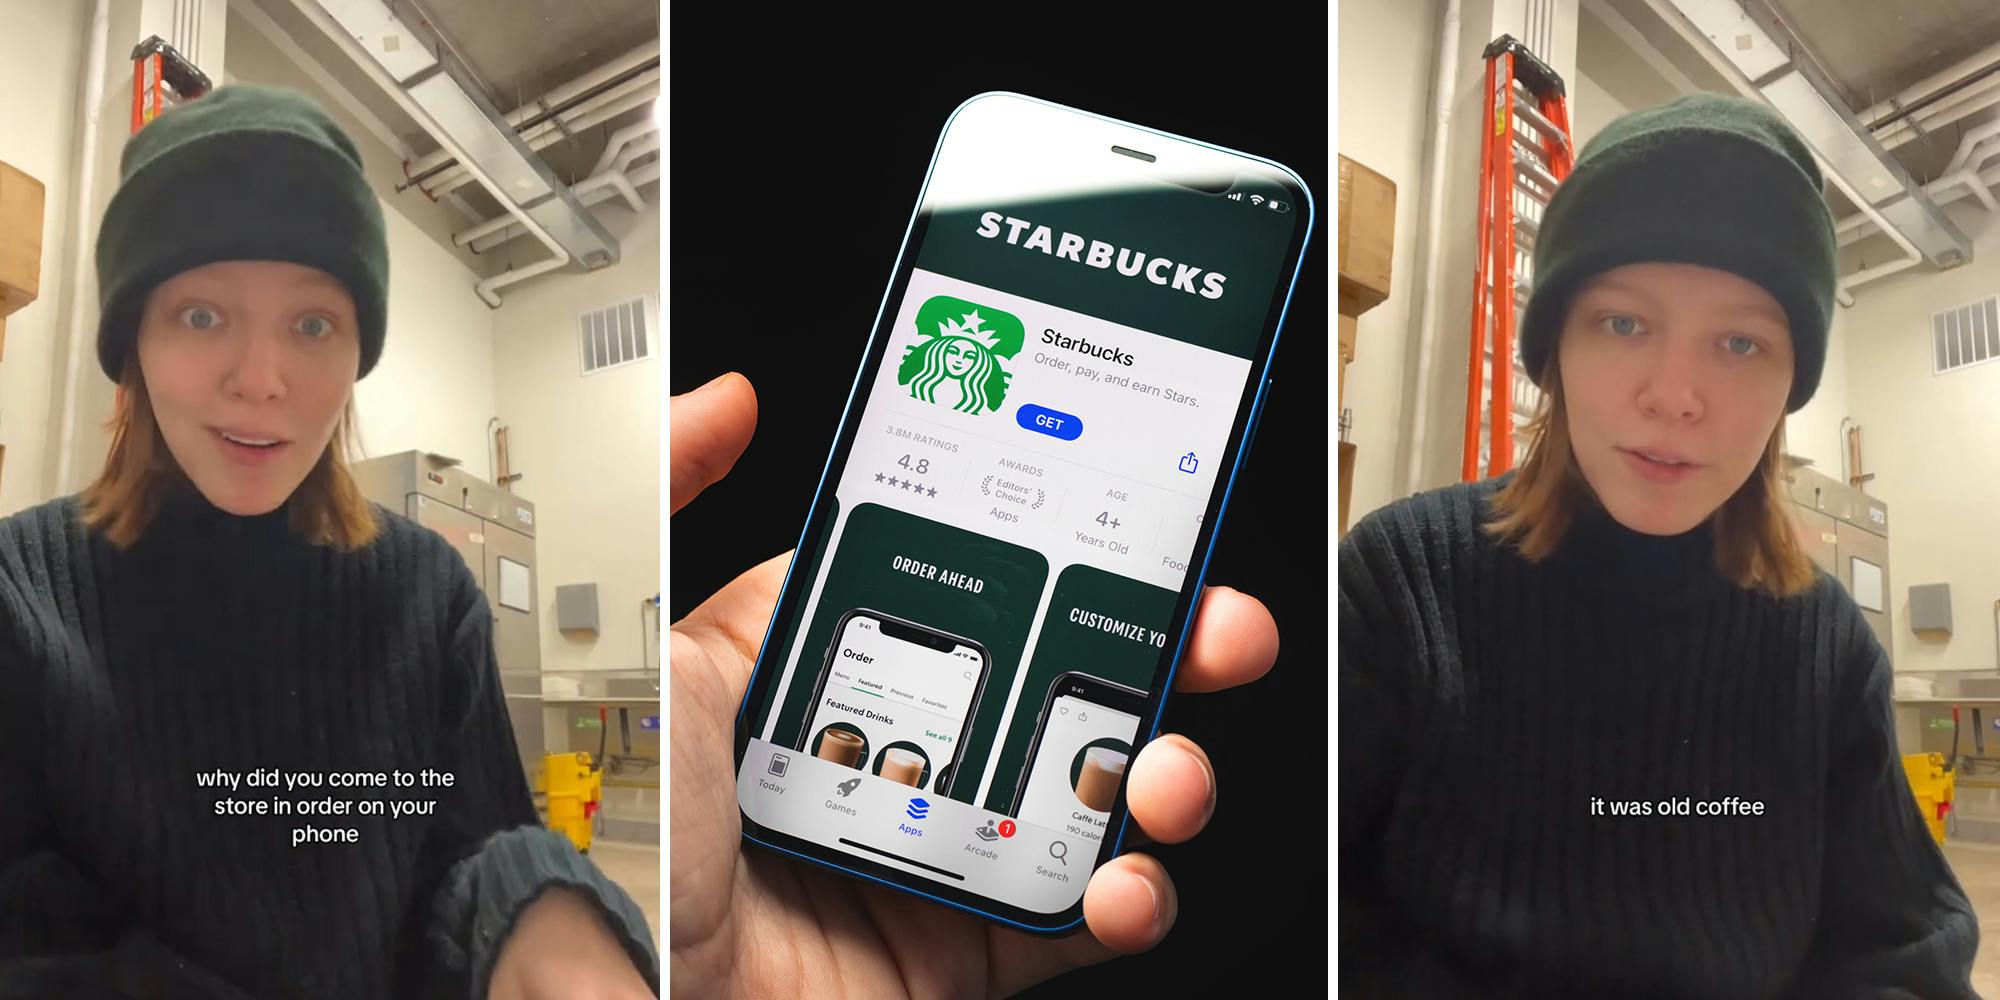 The barista invites customers to place orders via mobile phone right in front of her